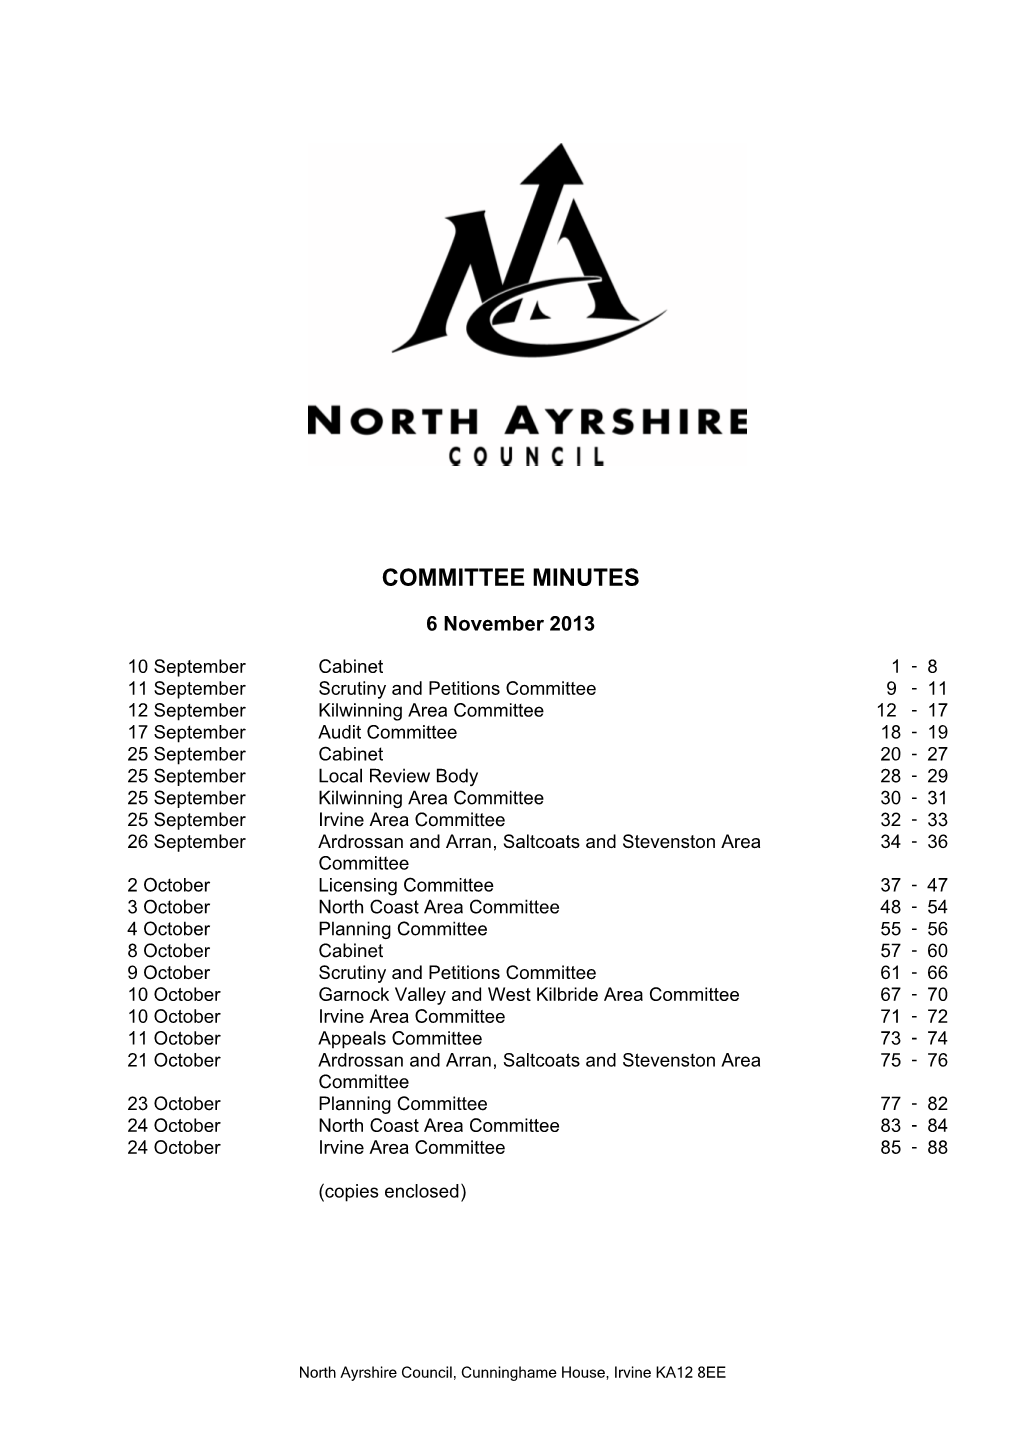 Committee Minutes